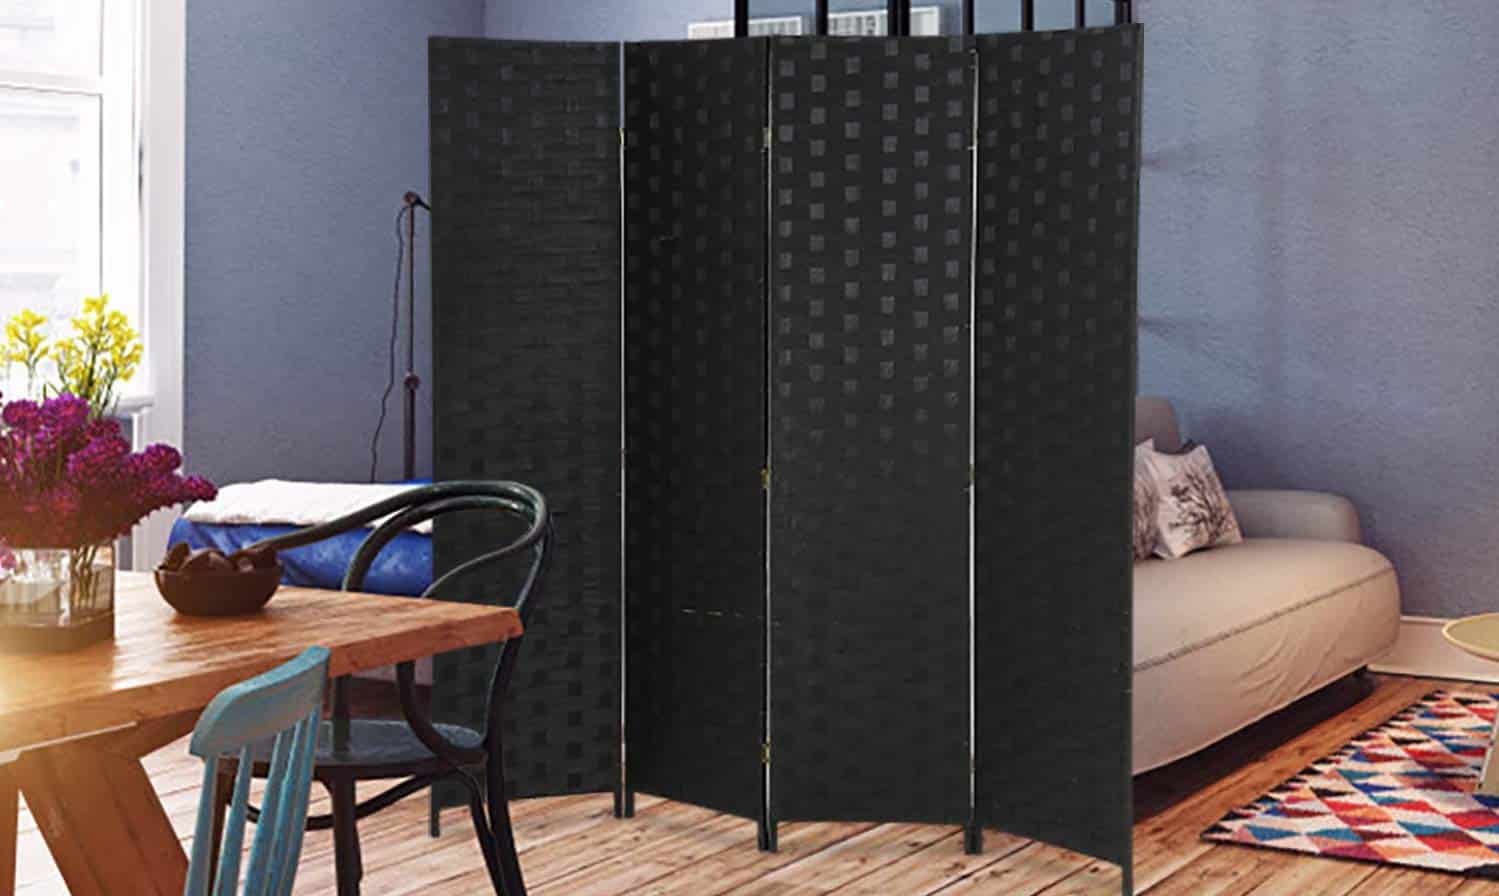 Room Partitions and Dividers Freestanding Room Dividers and Folding Privacy Screens 4 Panel 6 ft Foldable Portable Room Seperating Divider Brown Handwork Wood Mesh Woven Design Room Divider Wall